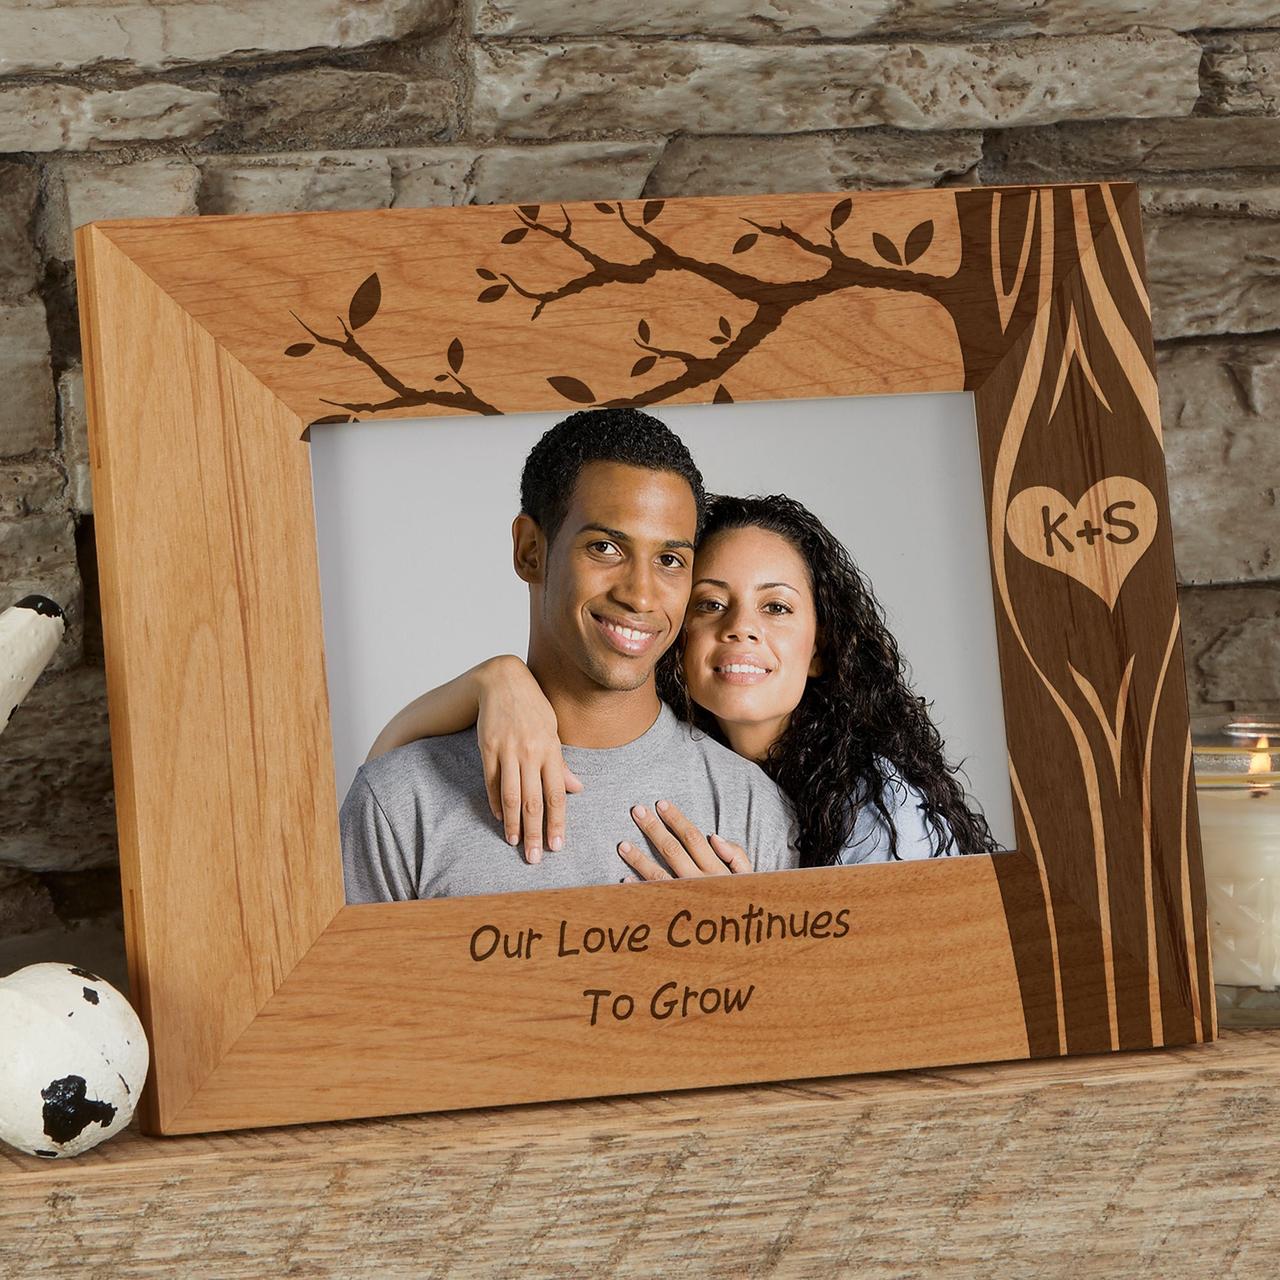 Personalized wood picture frame traditional fifth anniversary gift